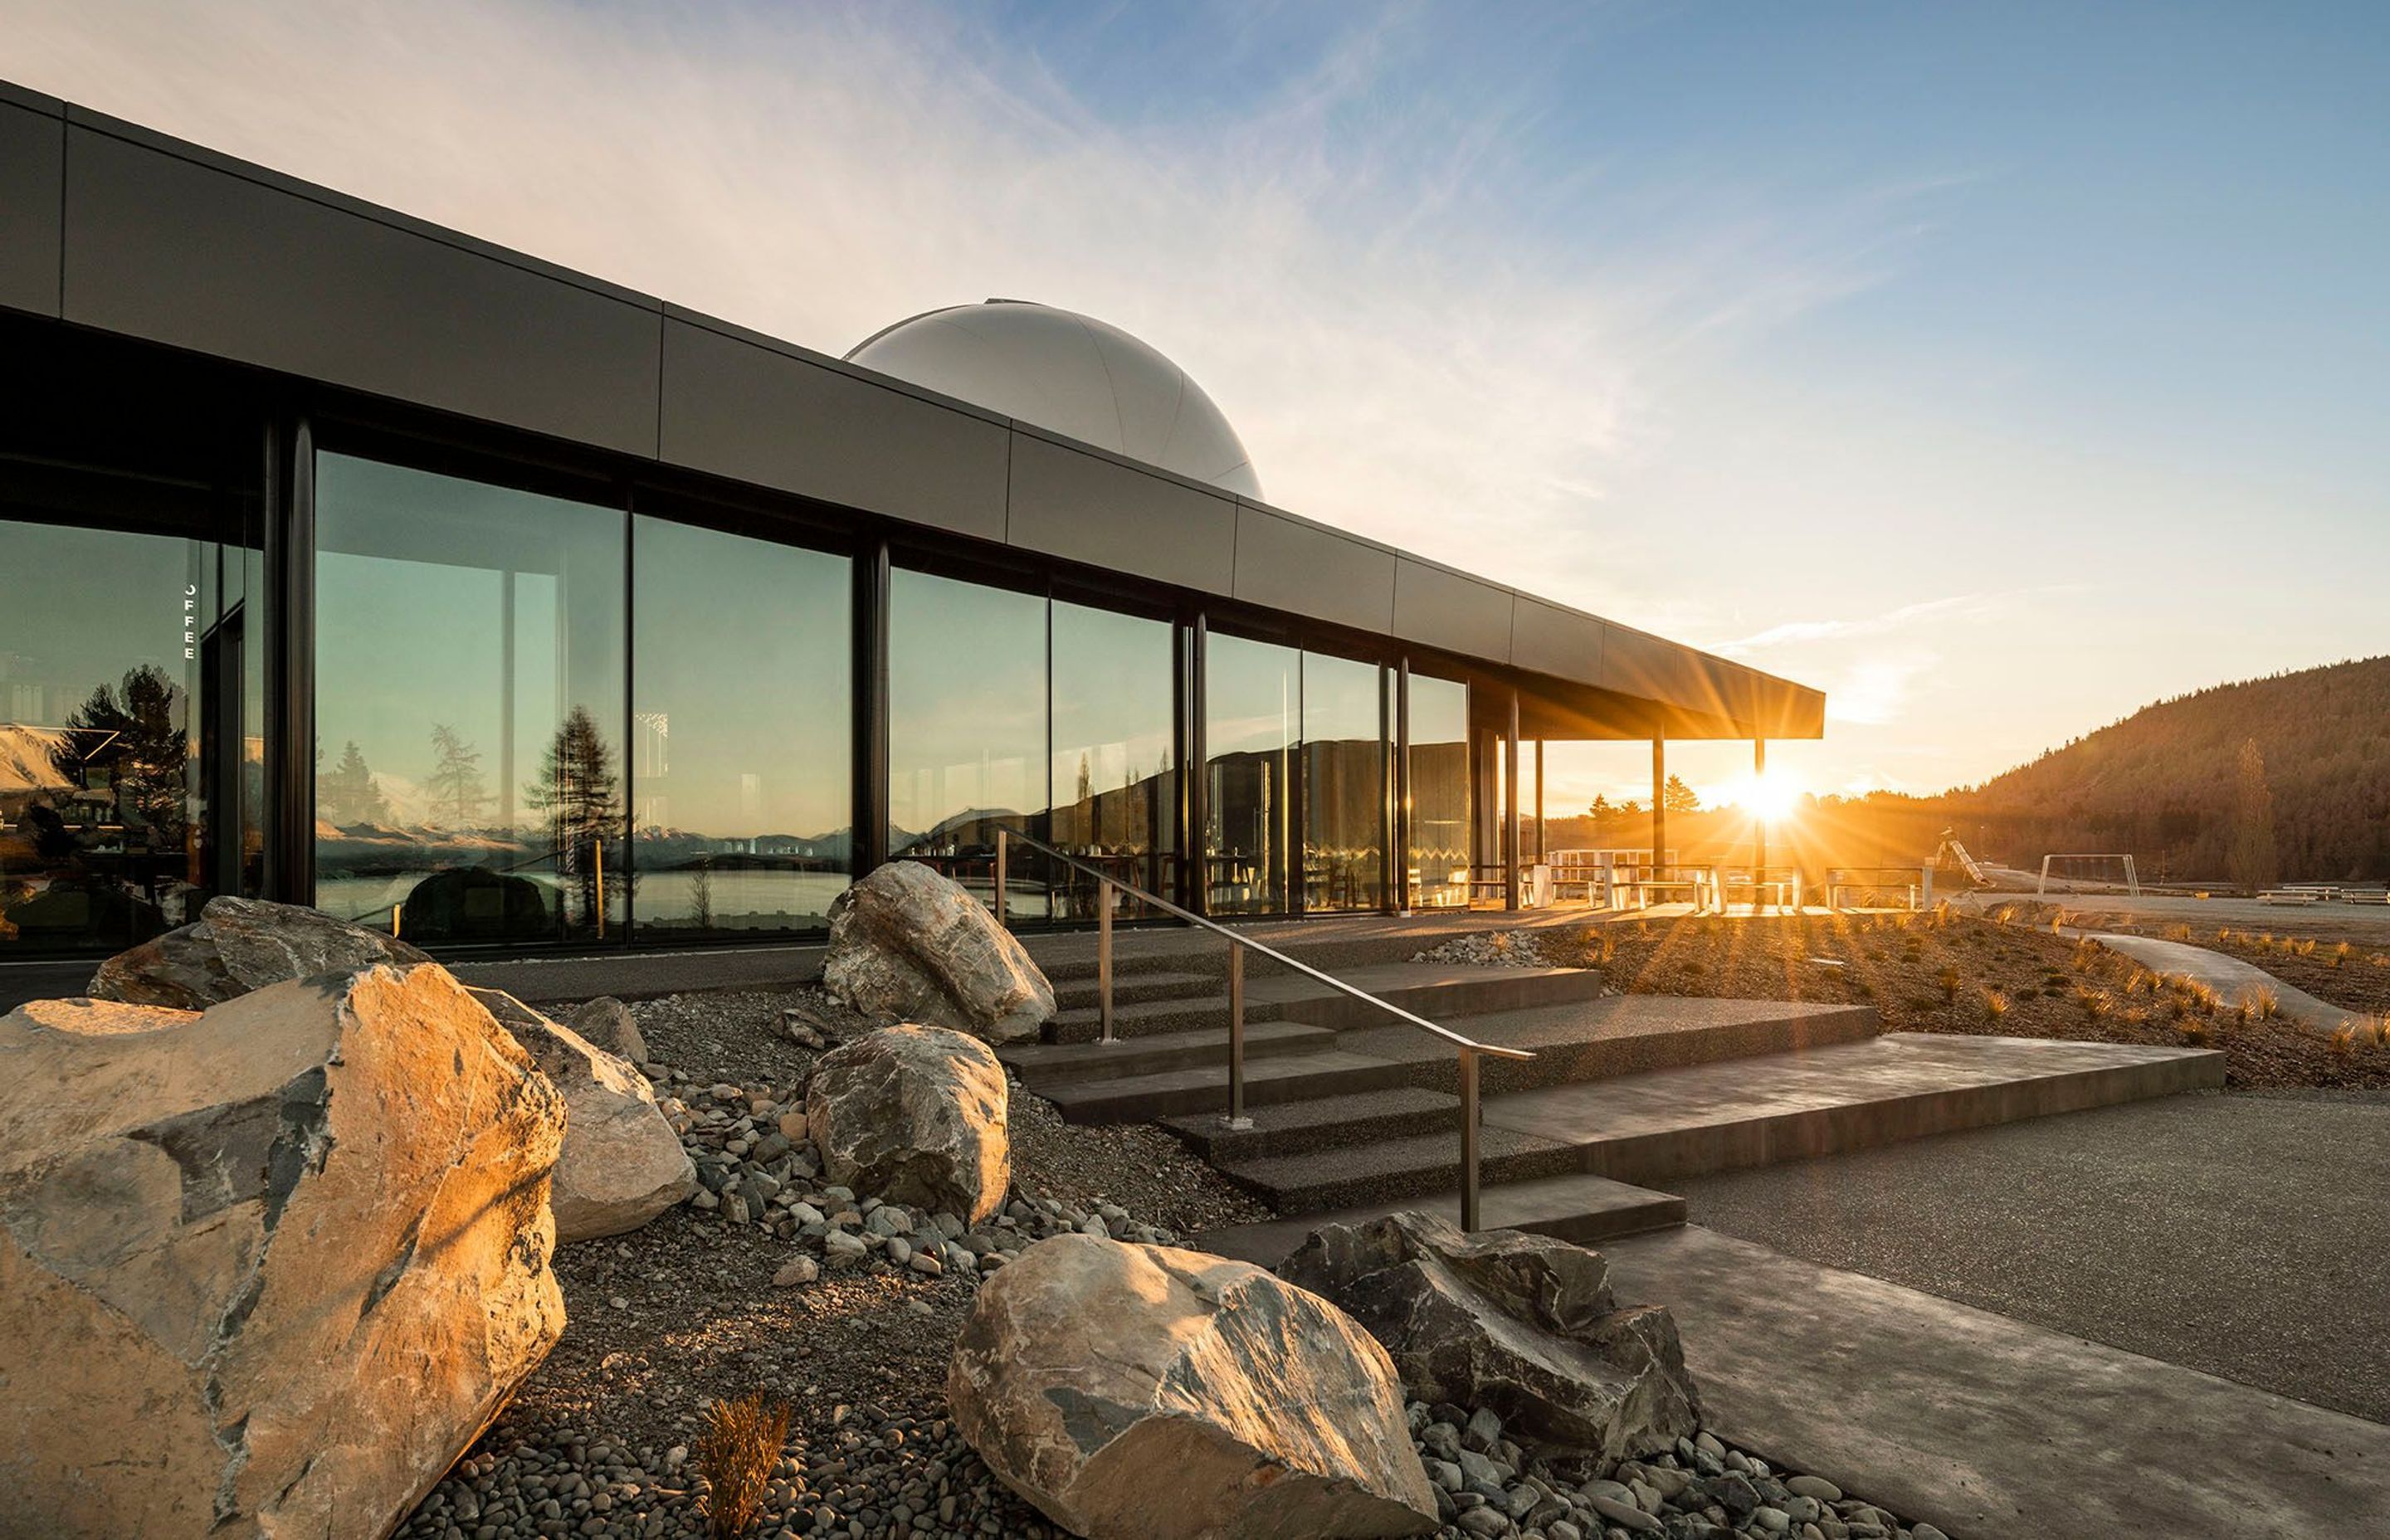 The Dark Sky Project at Tekapo is designed to celebrate the darkness of the star-lit night sky.